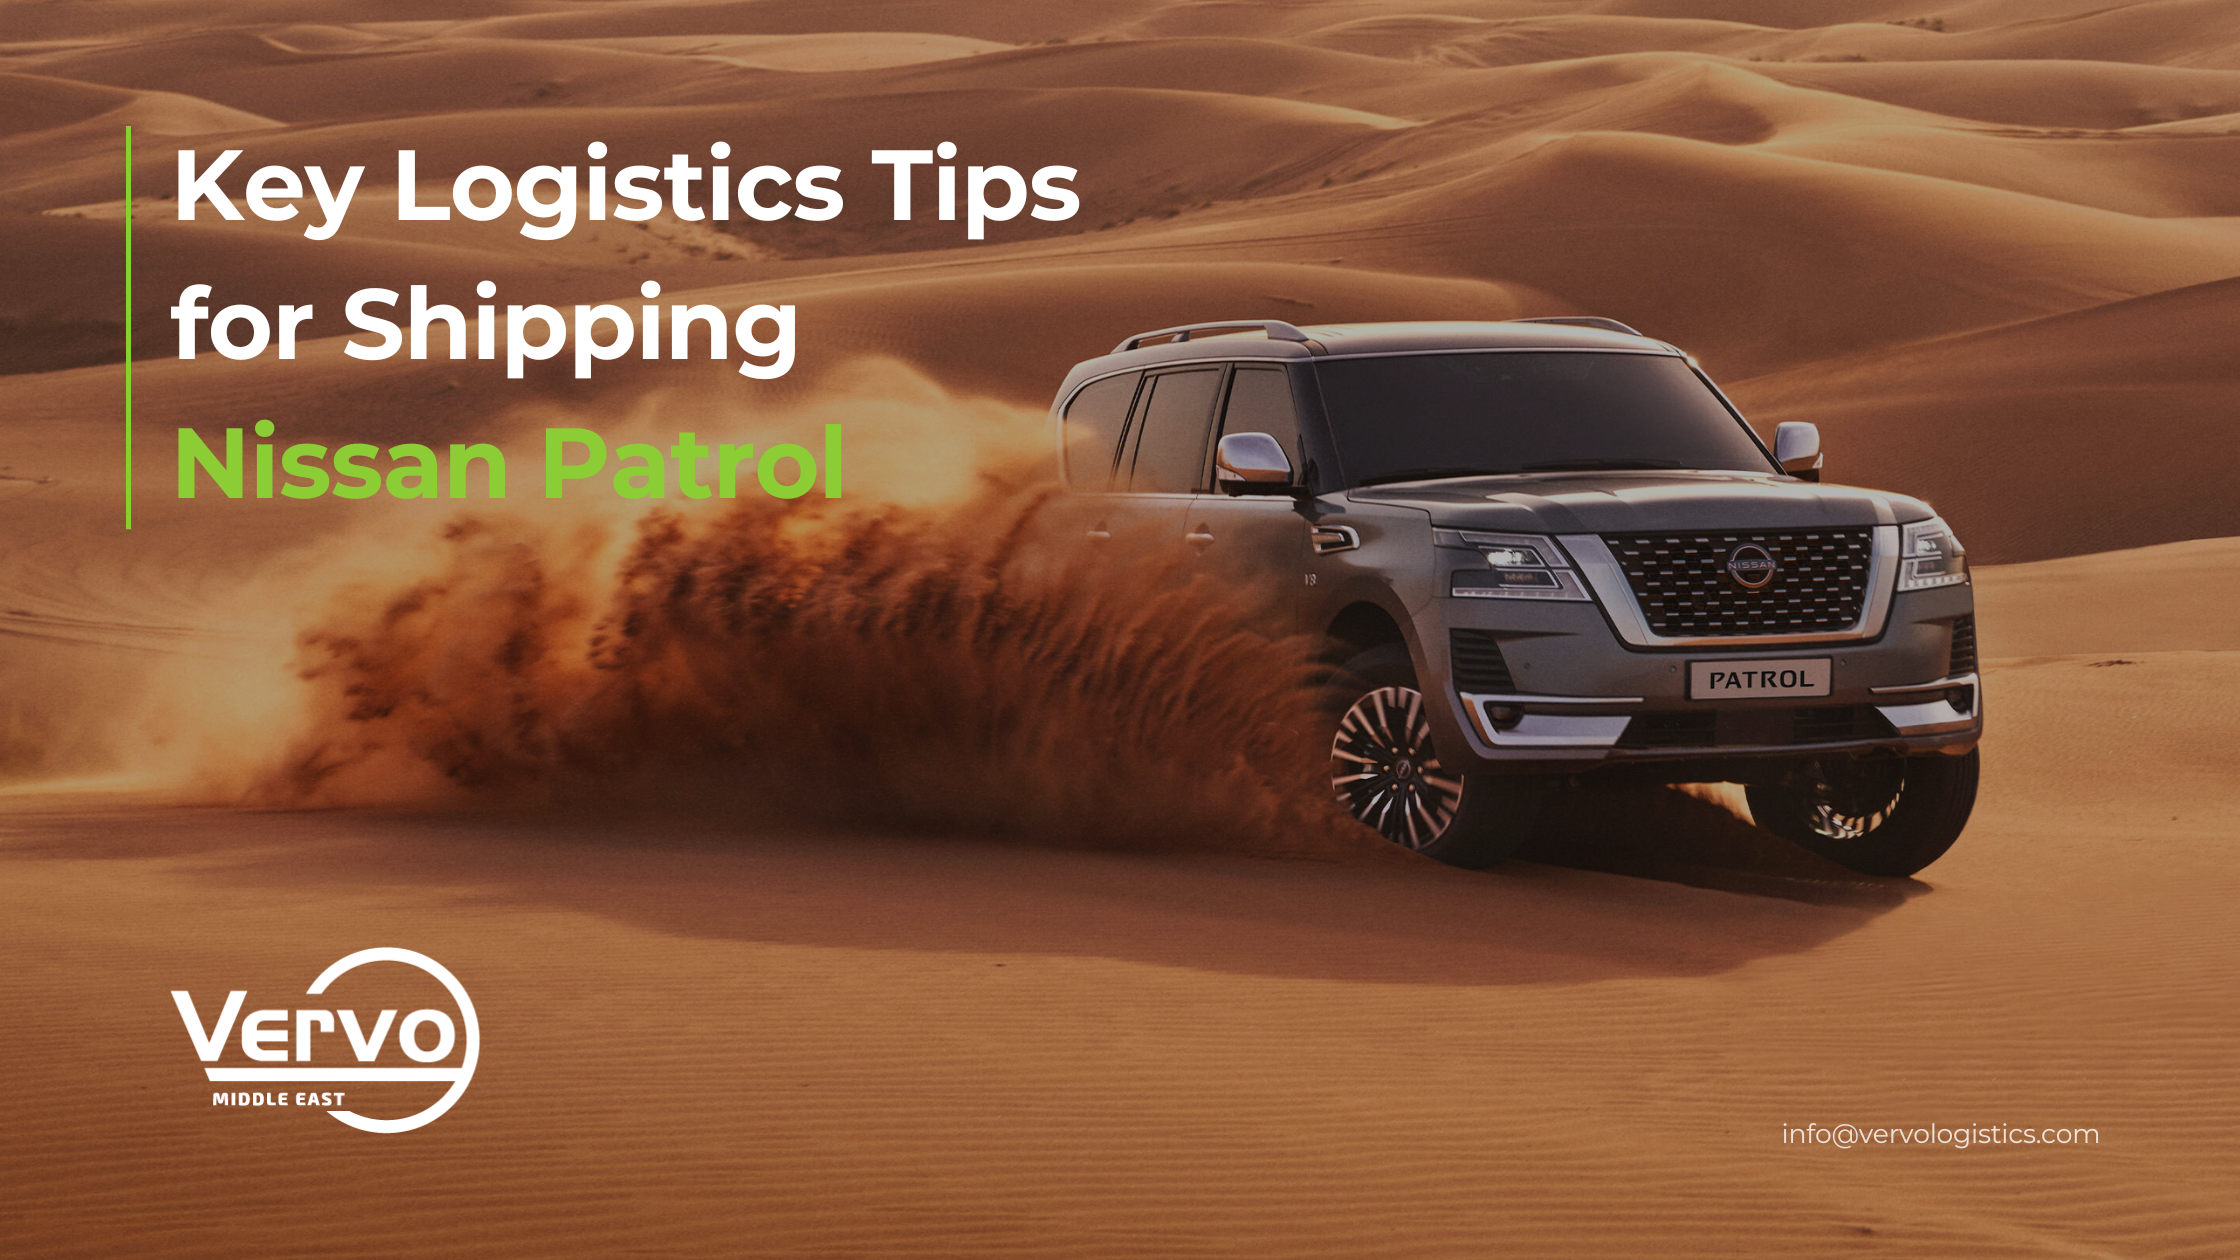 Key Logistics Tips for Shipping Nissan Patrol to the UAE and KSA by vervo middle east for car shipping services and logistics solutions in dubai 